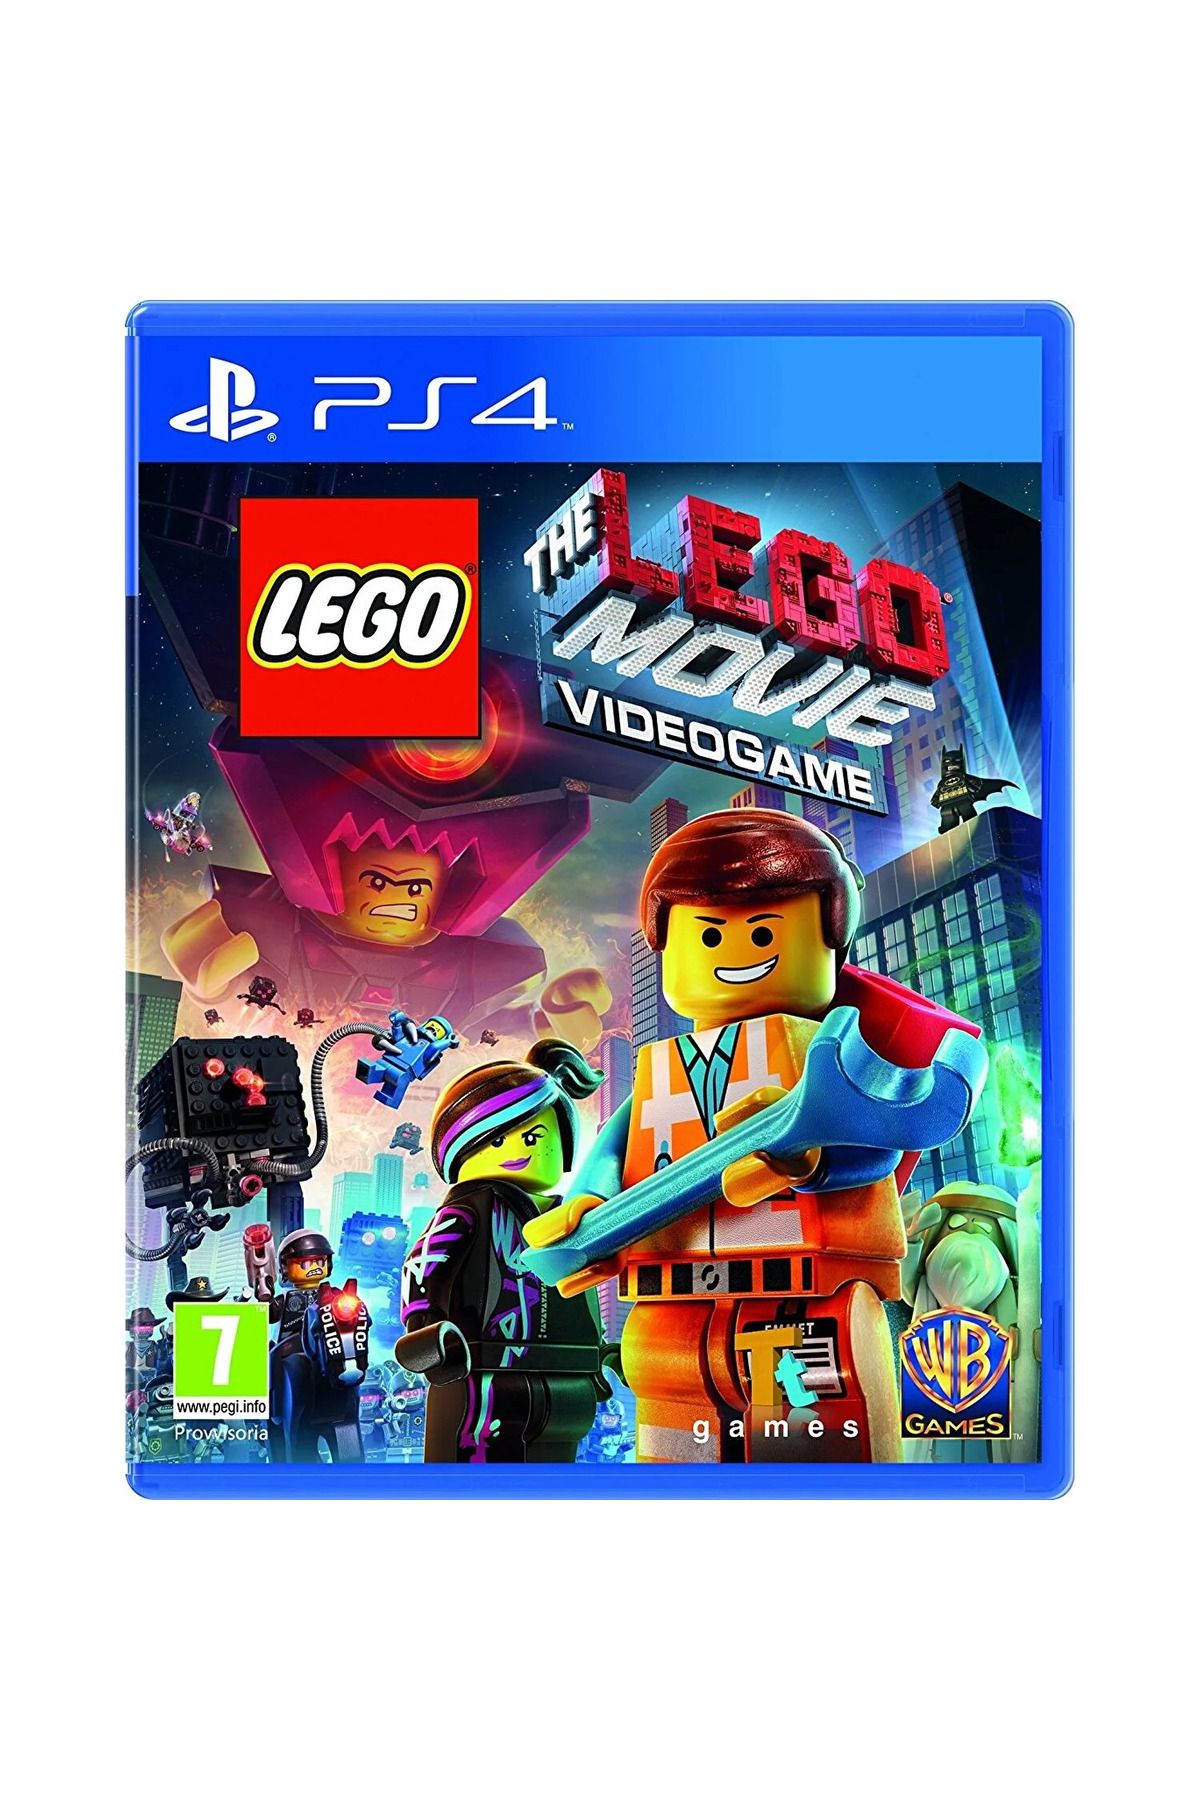 TT Games Ps4 Lego Movie Videogame